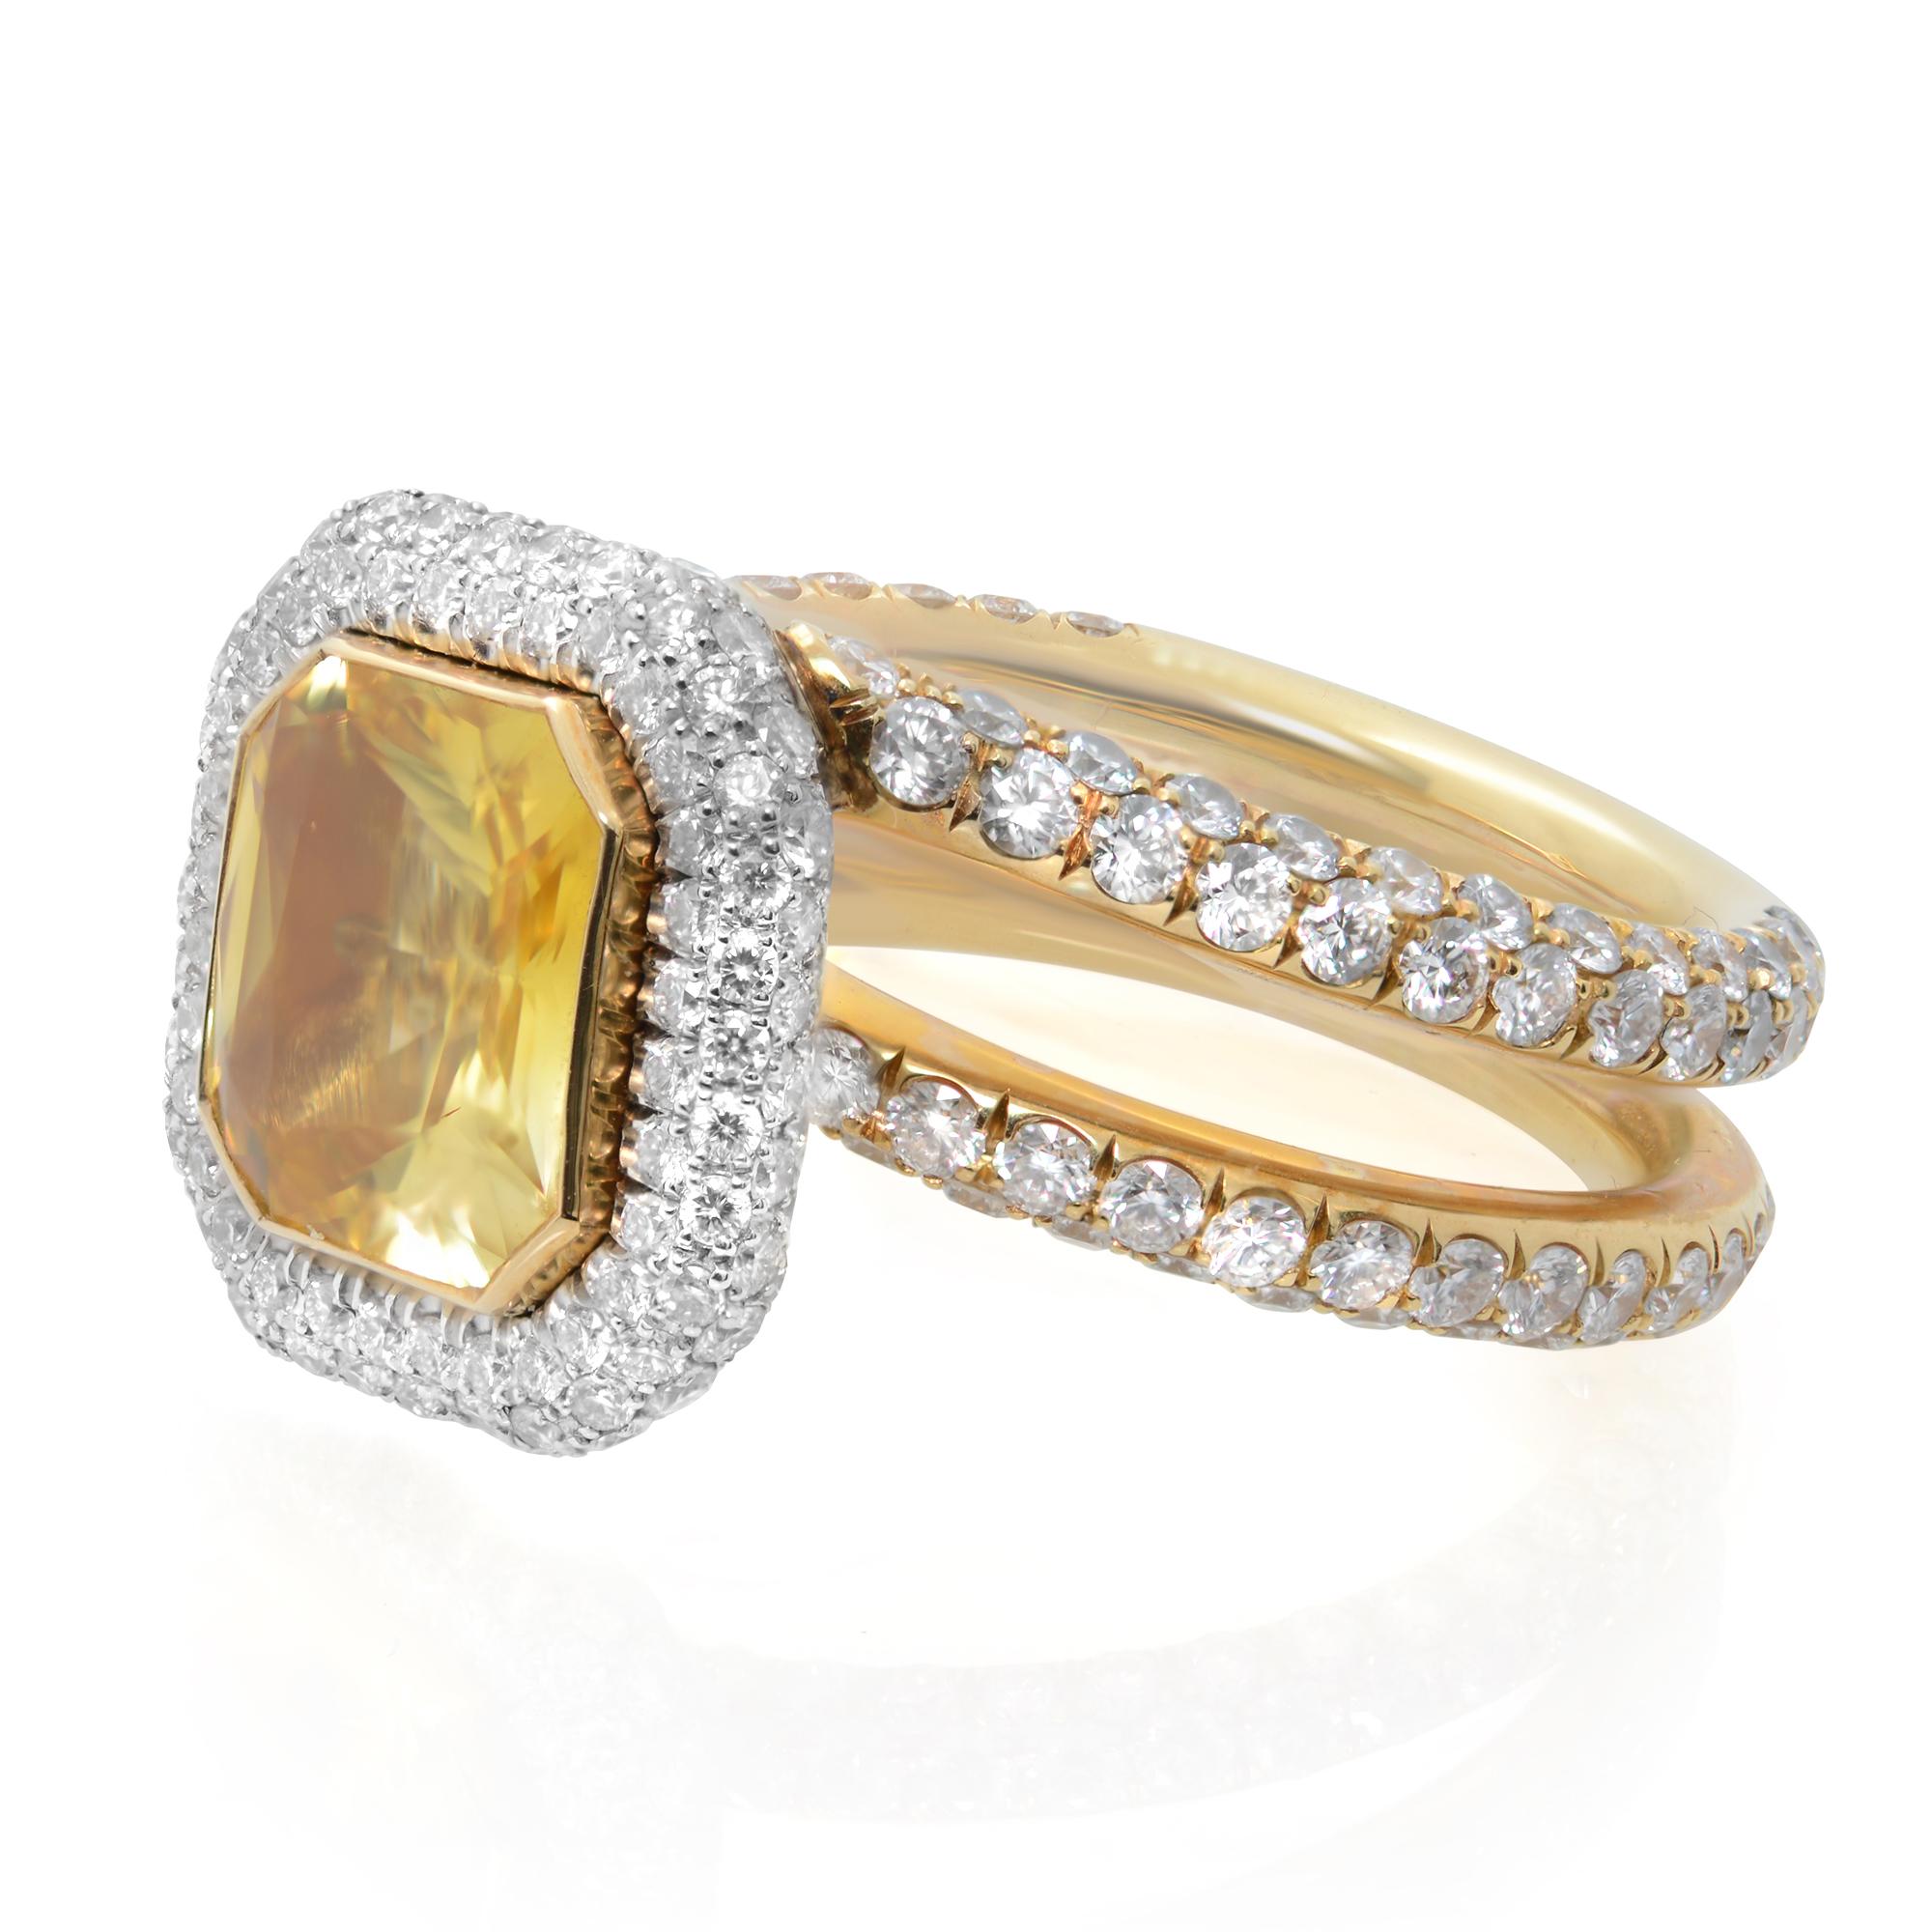 This is a gorgeous handmade custom natural yellow sapphire and diamond ring in 18K yellow gold and platinum. The center is a fancy radiant cut yellow sapphire weighting aprox. 3.00 carats. A diamond halo and Twisted Pavé Shank are totaling with 3.00